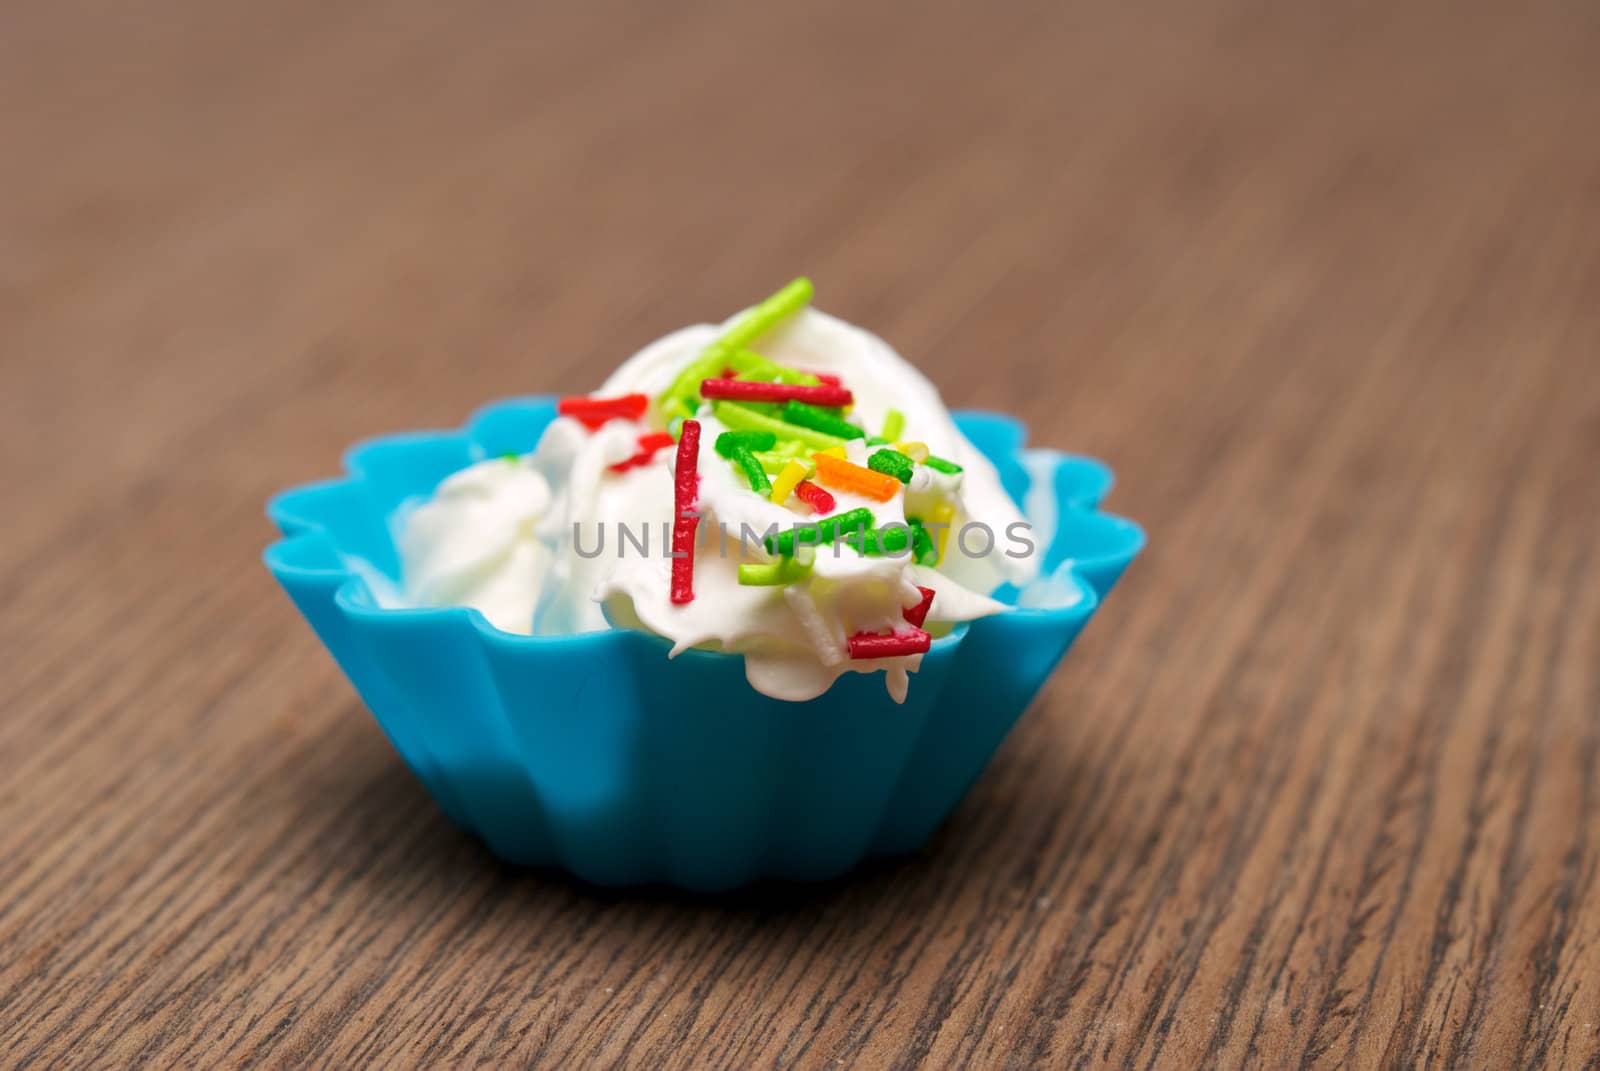 Portion of whipped cream in a blue form over wooden background. Shallow DOF